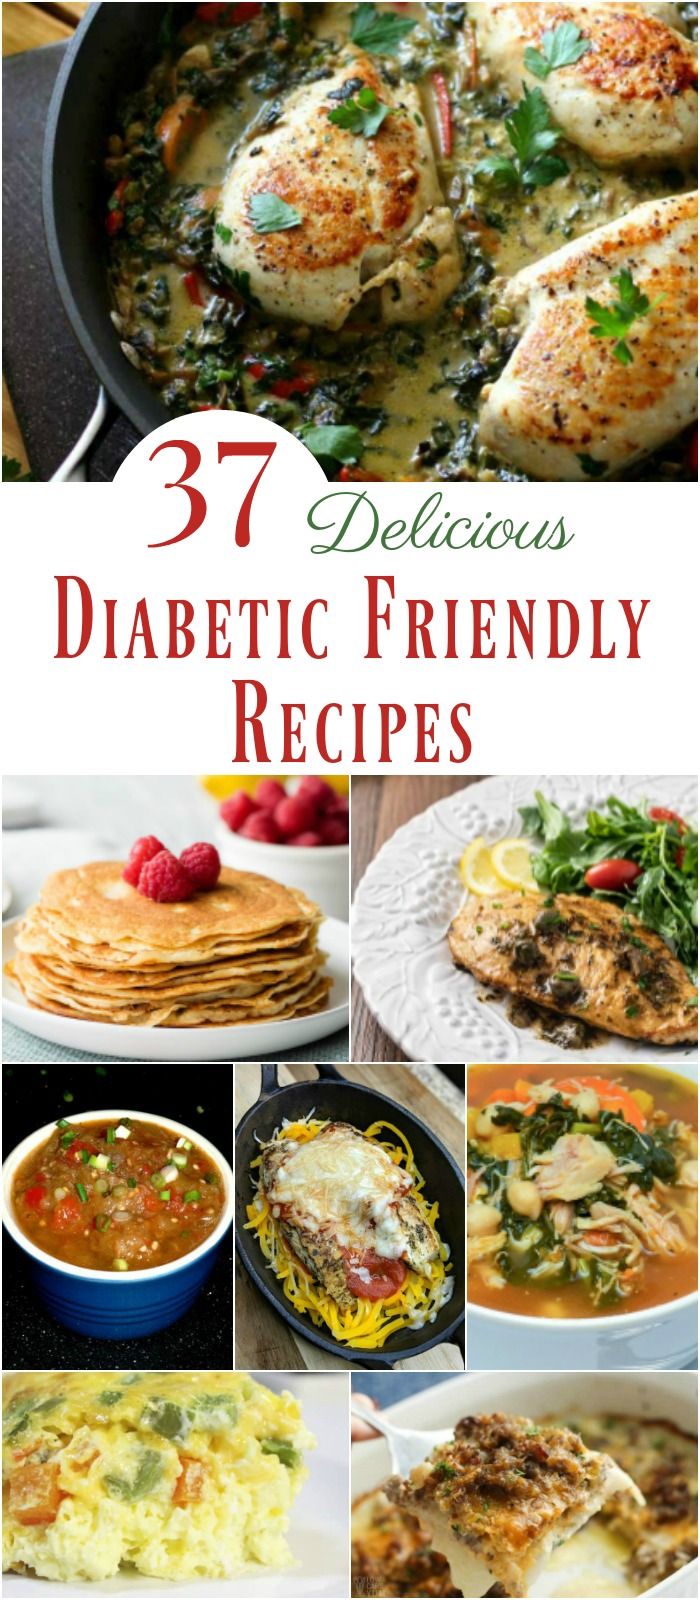 37 Delicious Diabetic Friendly Recipes for a Healthy Meal ...